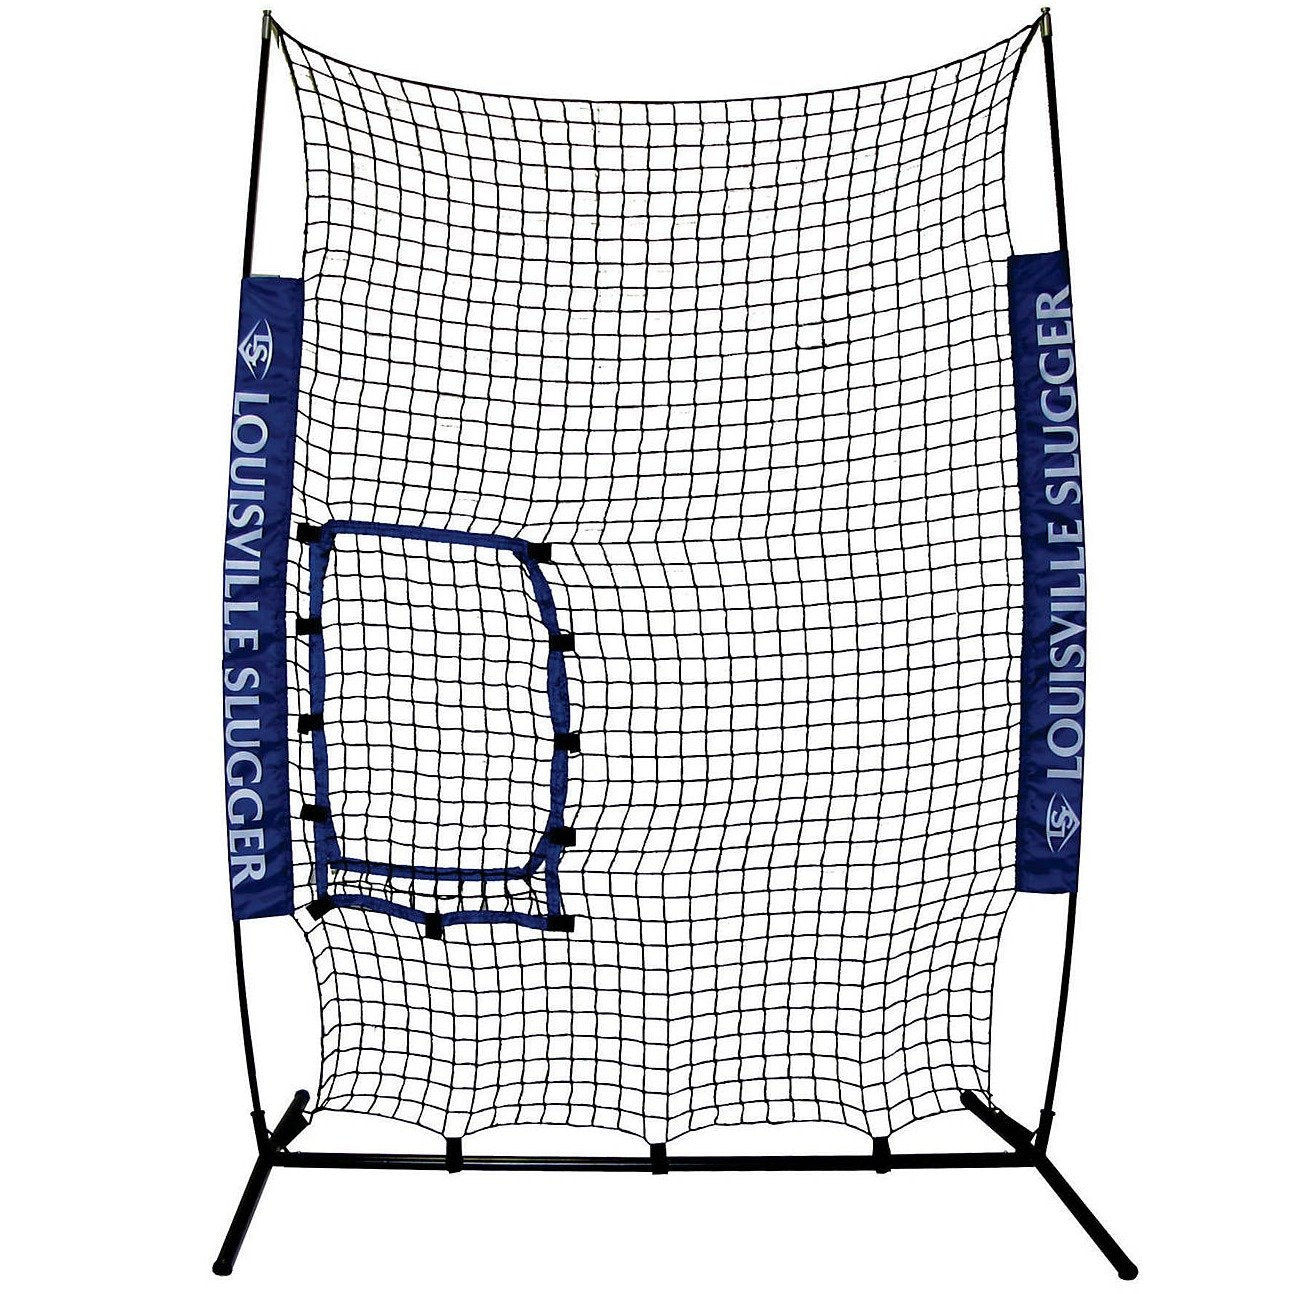 Louisville Slugger UPM 55 Blue Flame Pro Pitching Machine, Flex Protective Screen, Ball Caddy and Heater Sports 12-Pack Weighted Pitching Machine Baseballs Bundle - Pro-Distributing